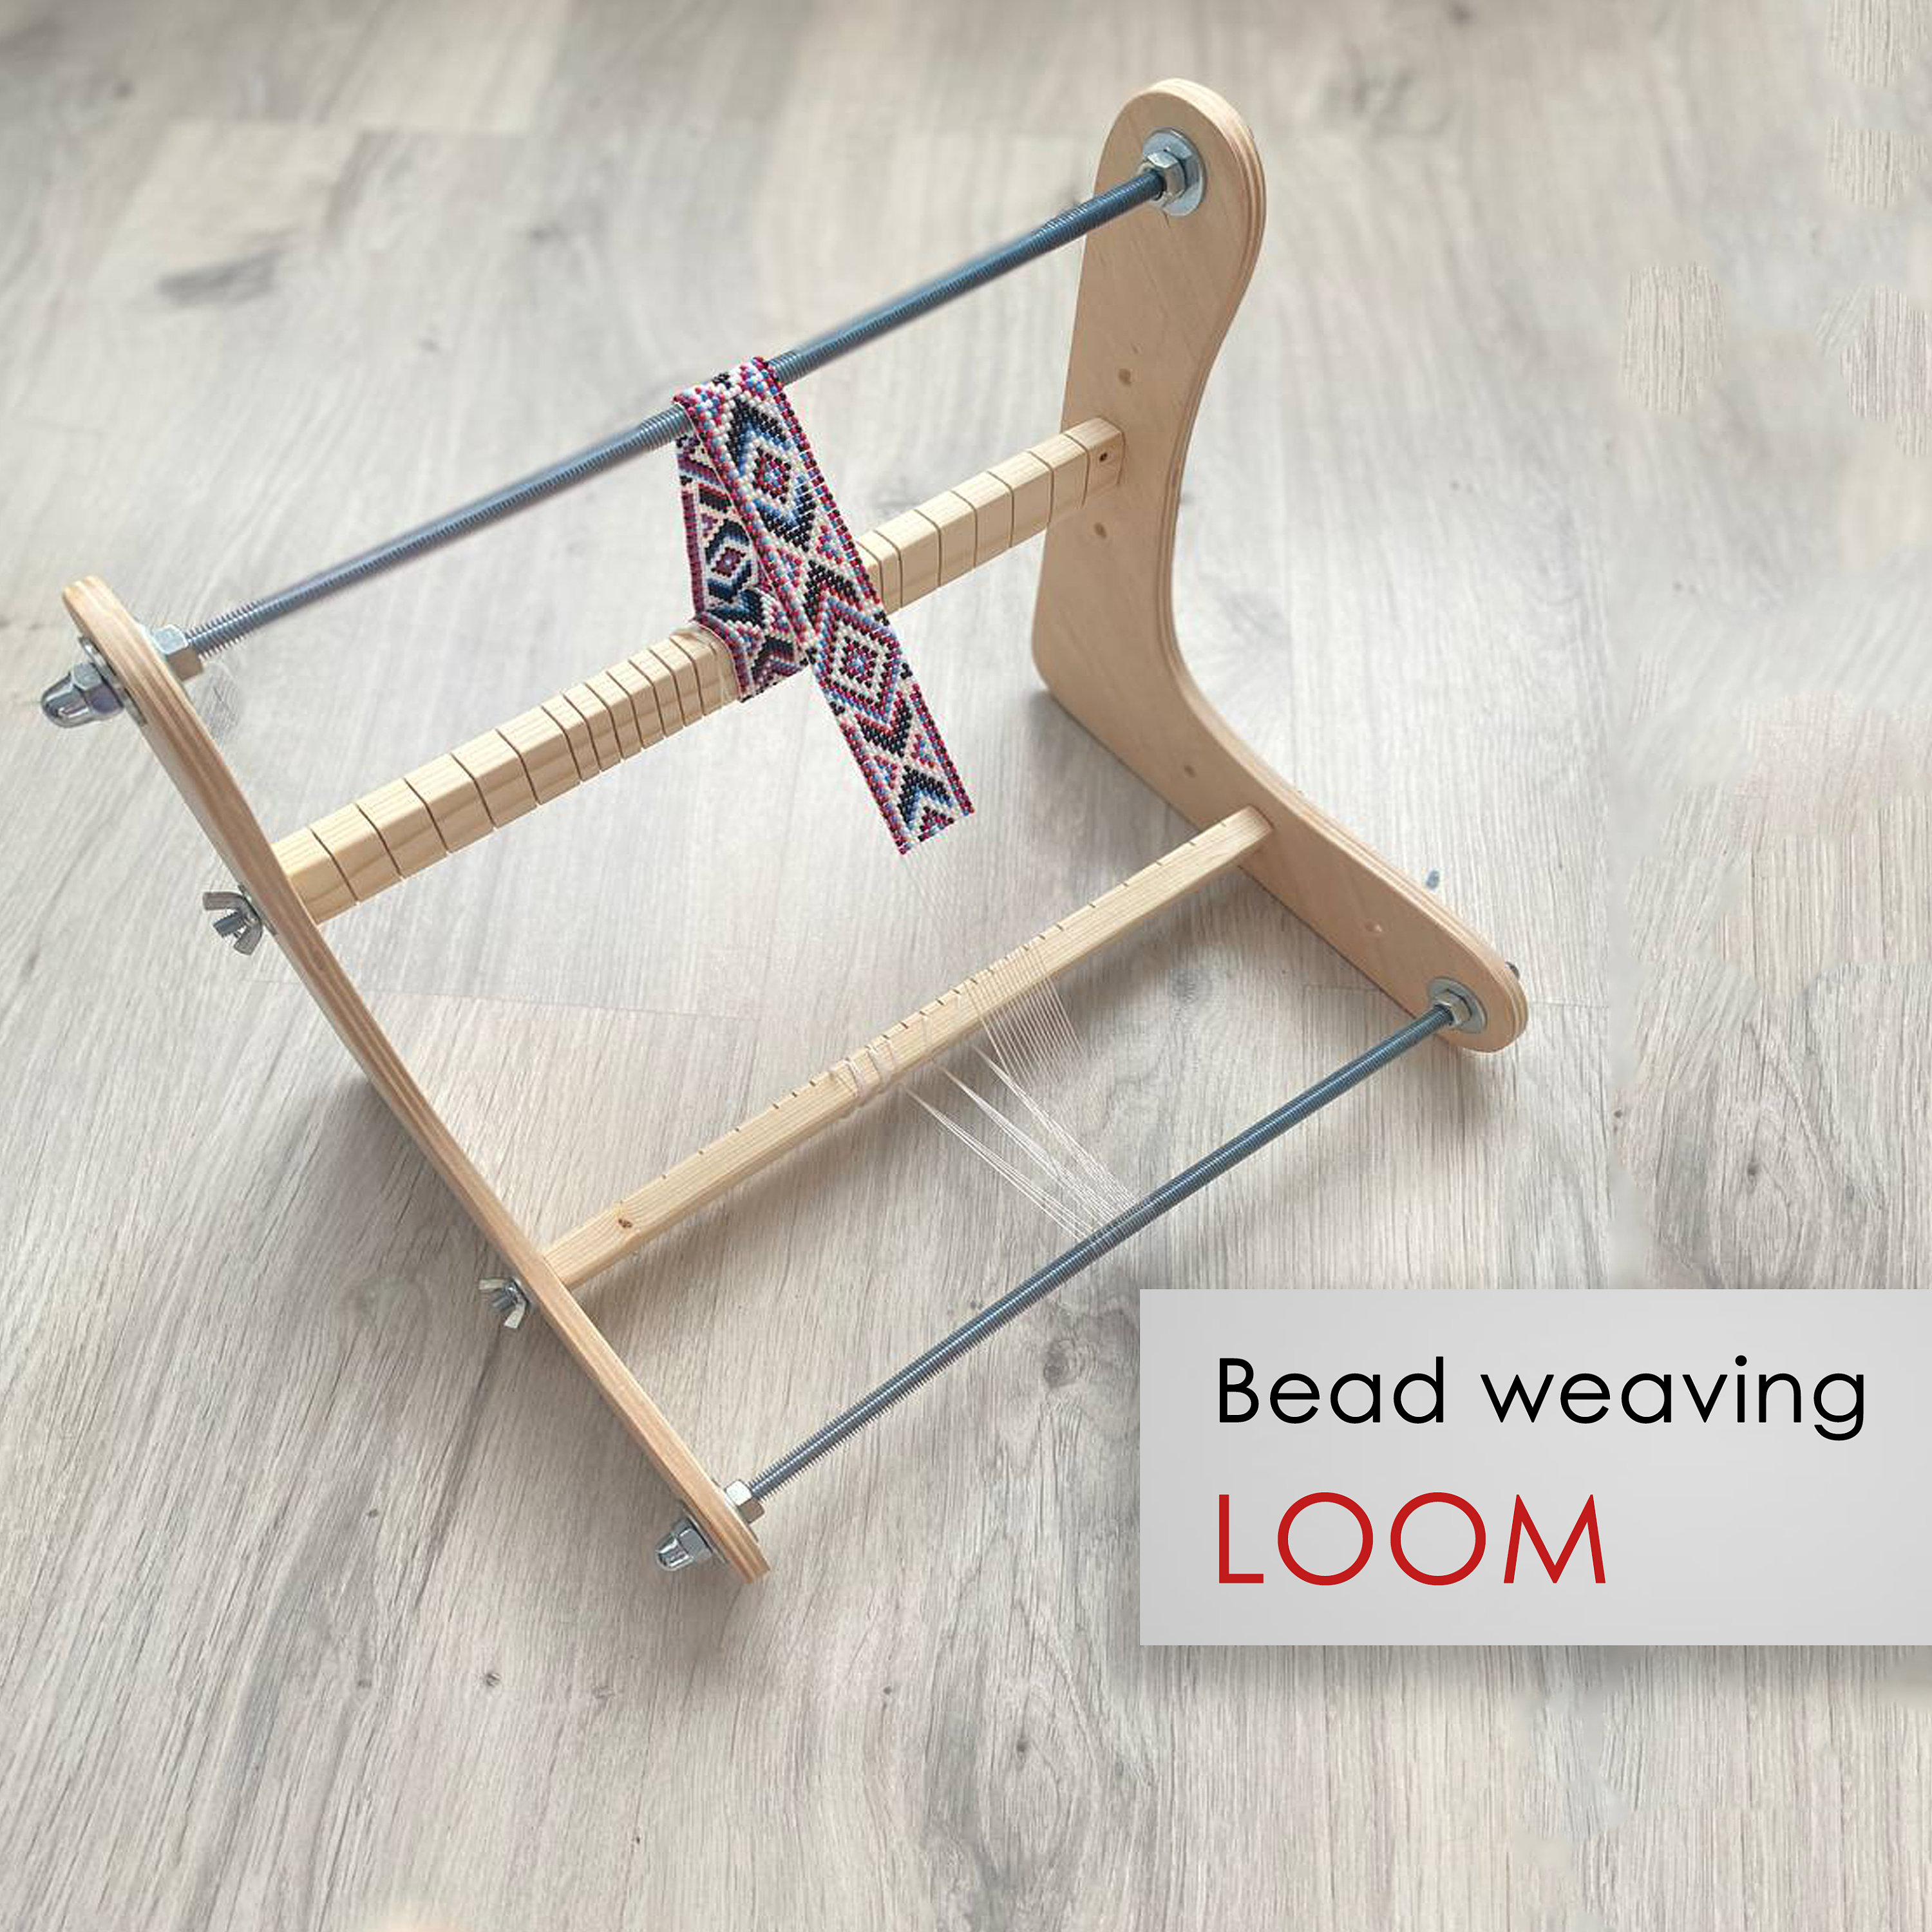 Natural Wooden Loom for Seed Bead Weaving for Loomed Stitch Short Necklaces  and Bracelets, Simple Looming for Beginners Size 6 X 18 